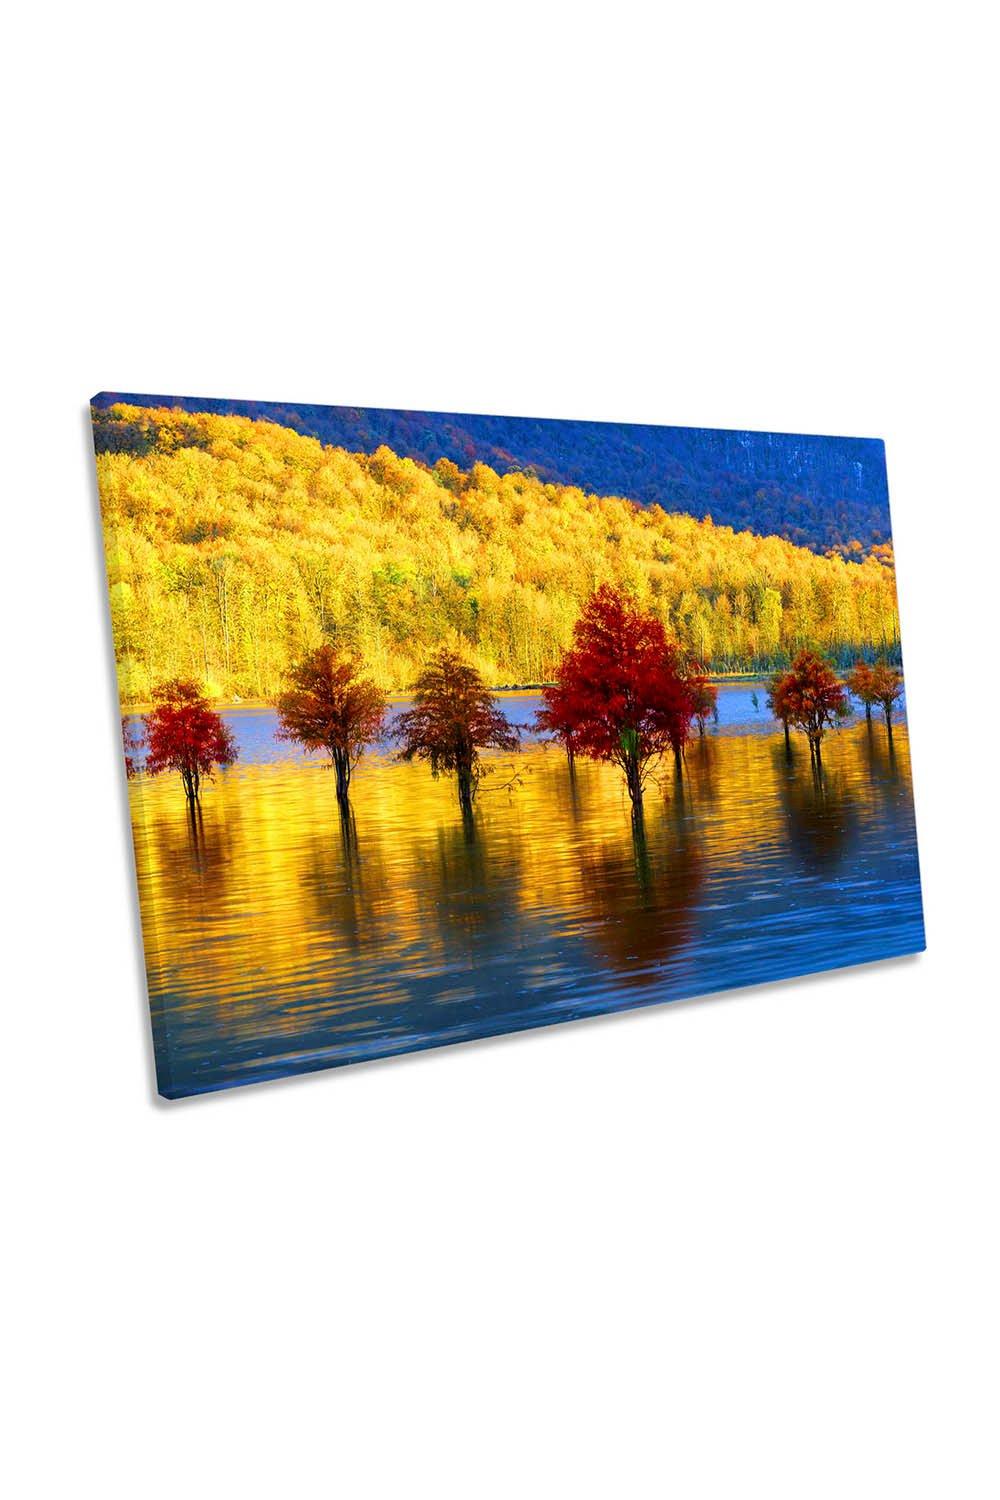 Autumn Lake Yellow and Red Trees Lake Canvas Wall Art Picture Print